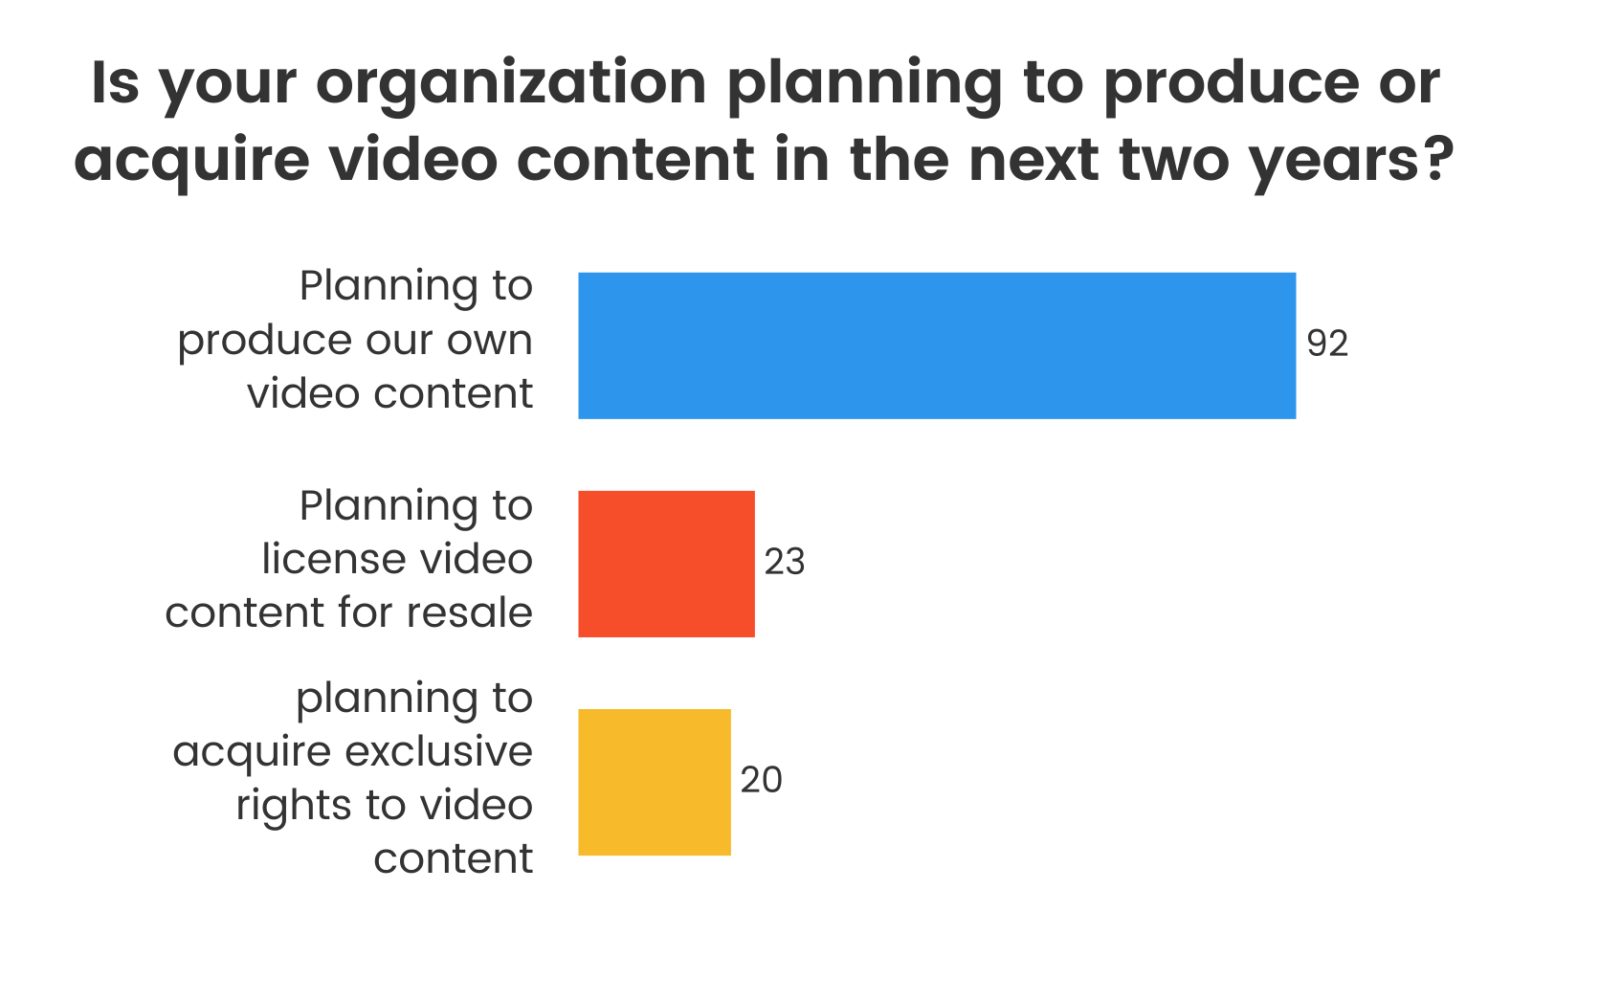 : HOW IS YOUR ORGANIZATION USING, OR PLANNING TO USE, VIDEO CONTENT? 92% said planning to produce our own content, 23% said planning to license video content for resale and 20% said planning to acquire exclusive rightst to video content